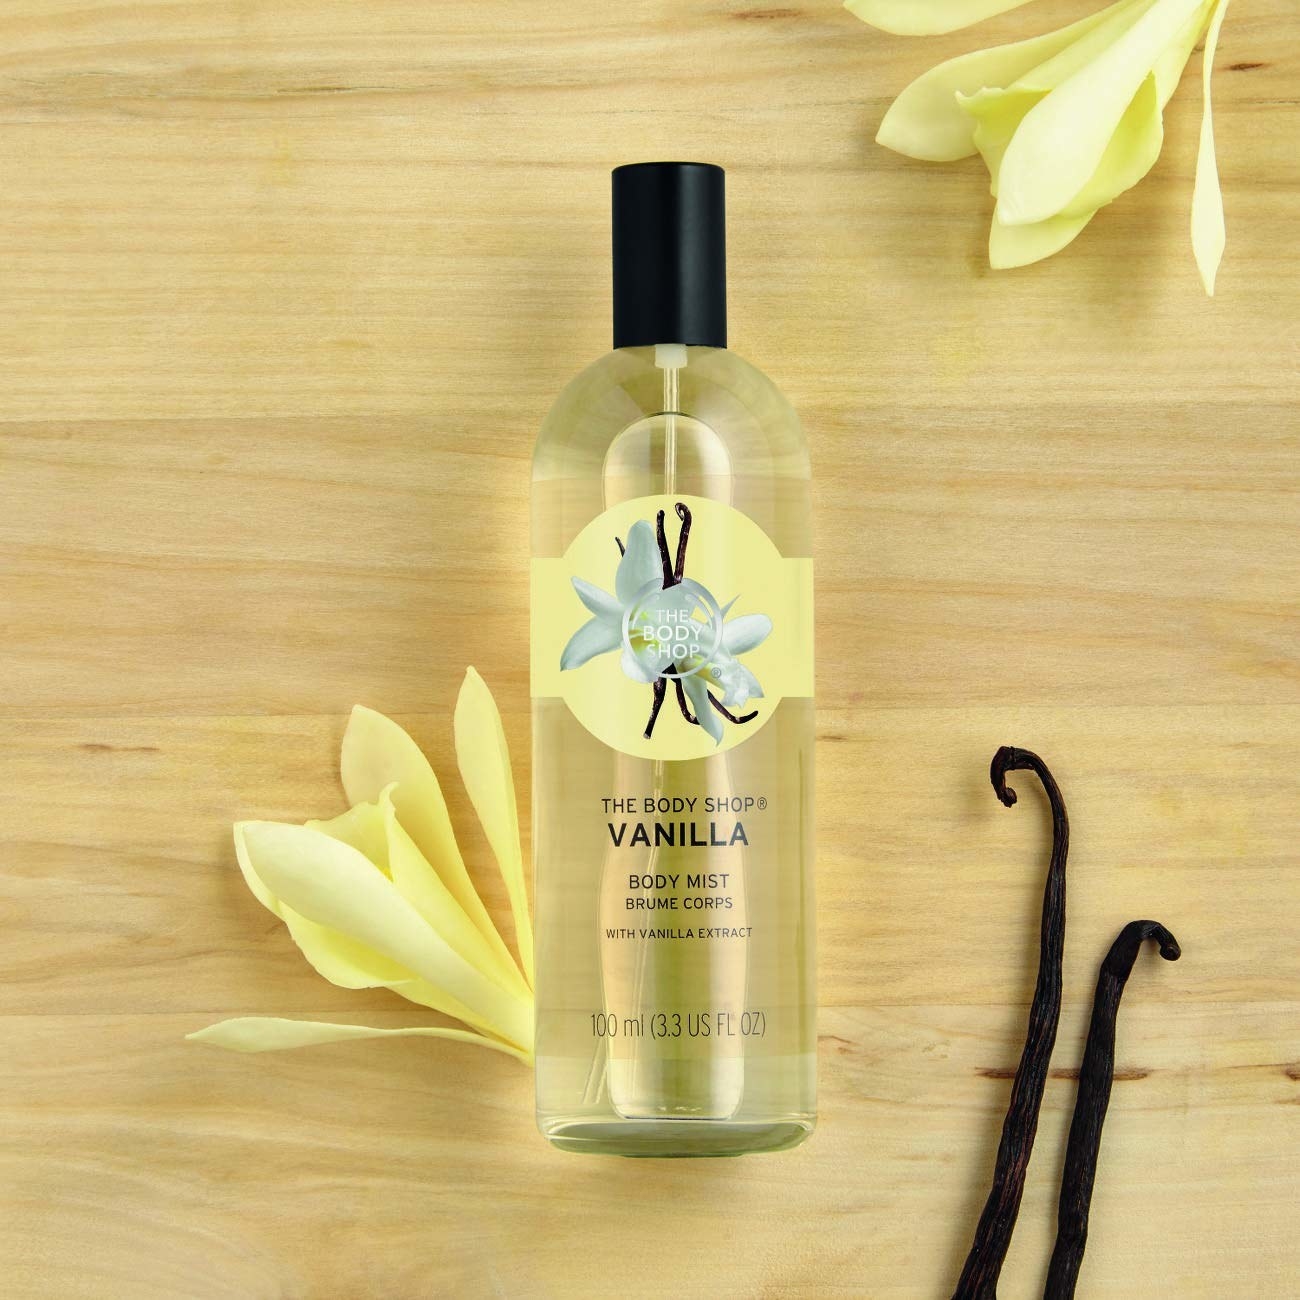 A vanilla body scent surrounded by vanilla 